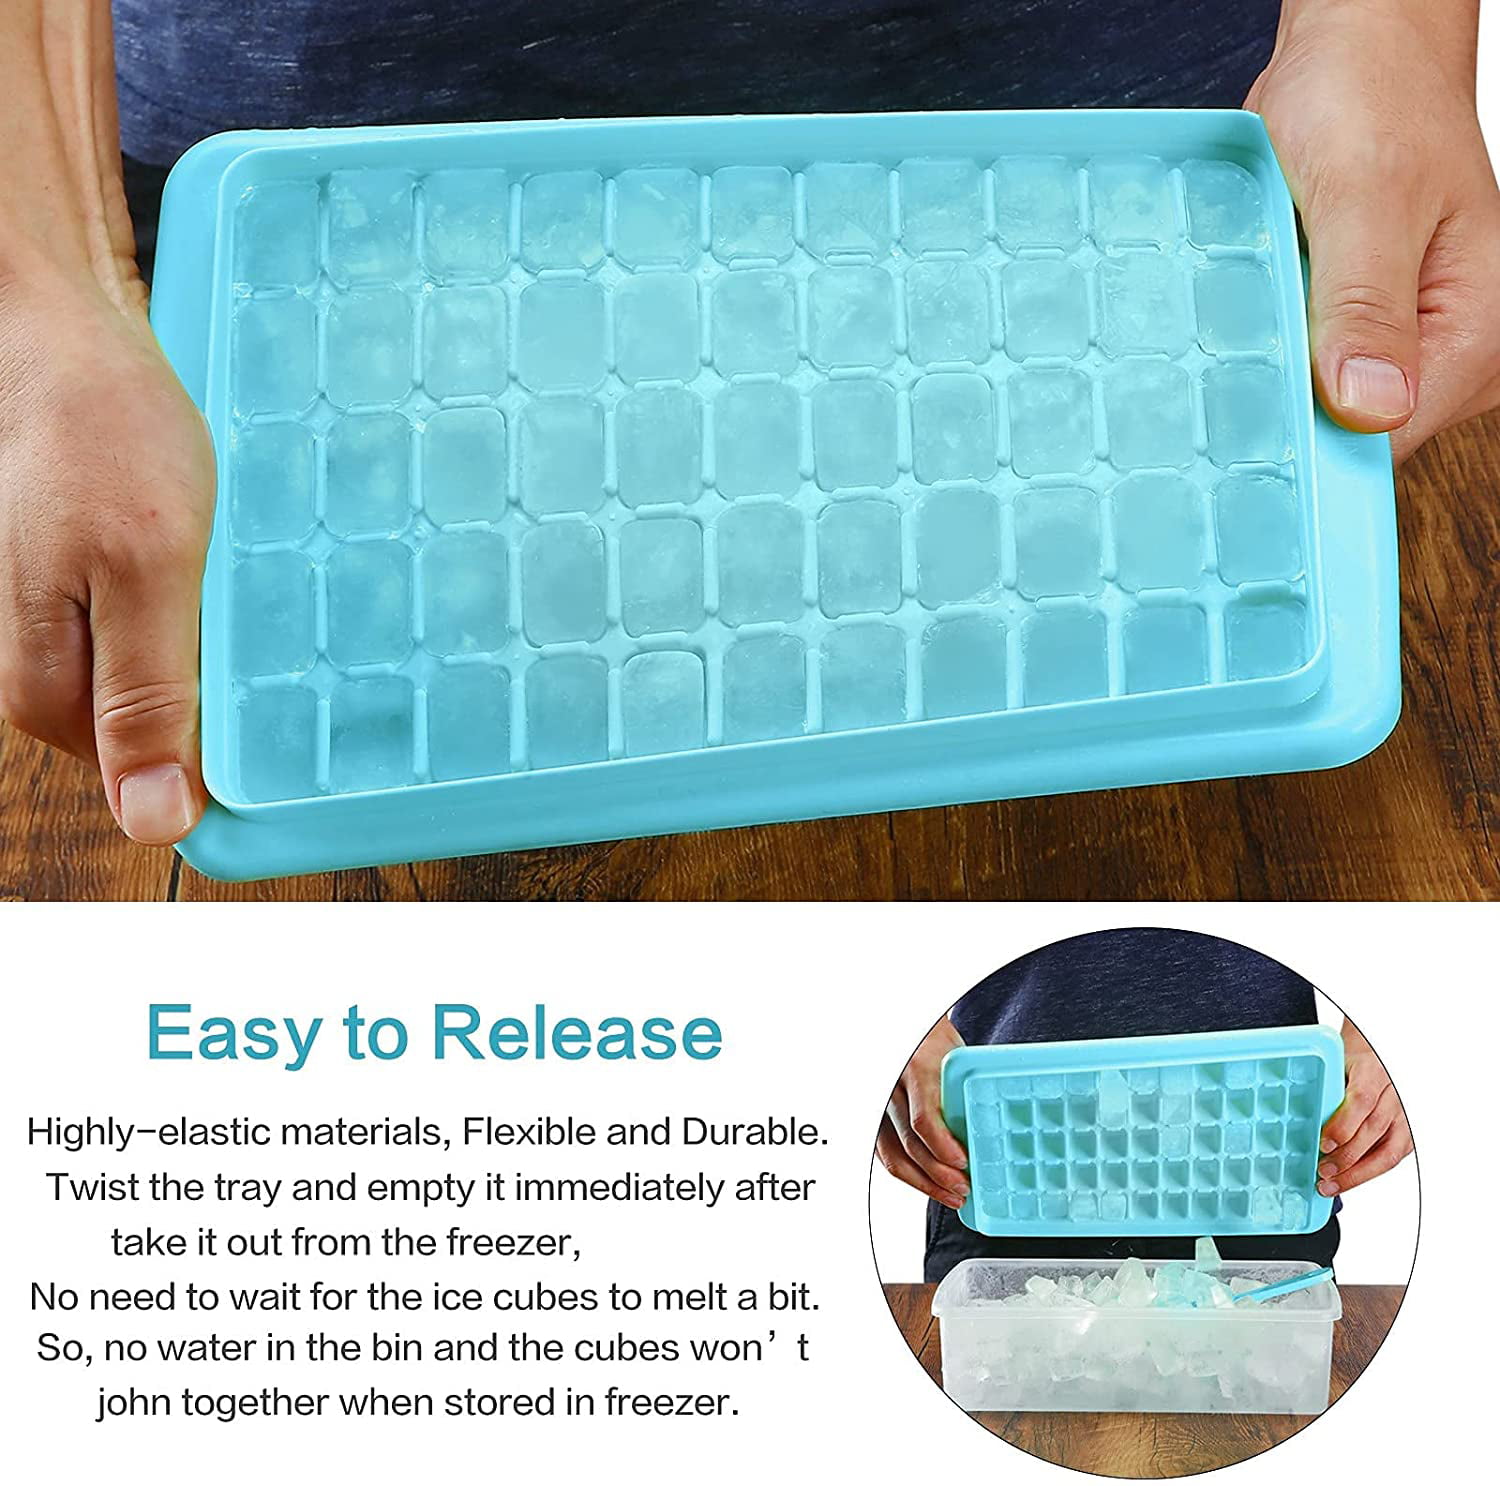 Metal Ice Cube Trays for Freezer with Easy Release Handle,and Building  Brick Ice Tray or Candy Mold for Lego Fans,2pcs Ice Freezer Molds